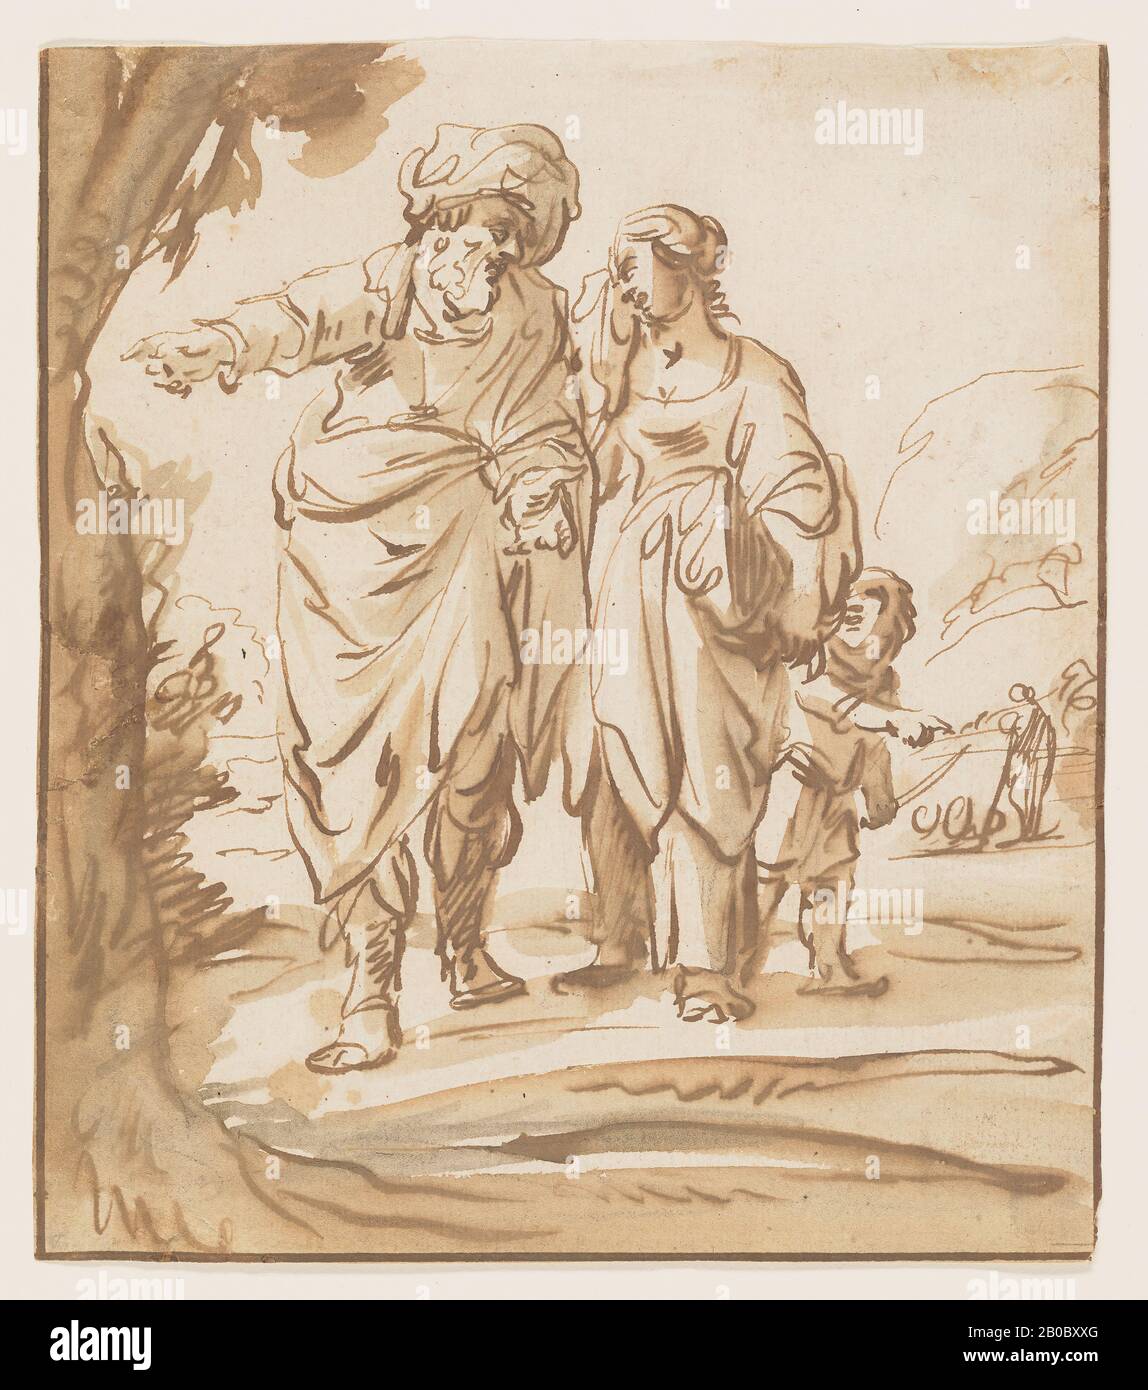 Pieter Jansz., The Expulsion of Hagar, 1602-1672, pen and brown ink and brown and grey washes over traces of graphite on paper, 7 1/2 in. x 6 1/2 in. (19 cm. x 16.5 cm.) Stock Photo